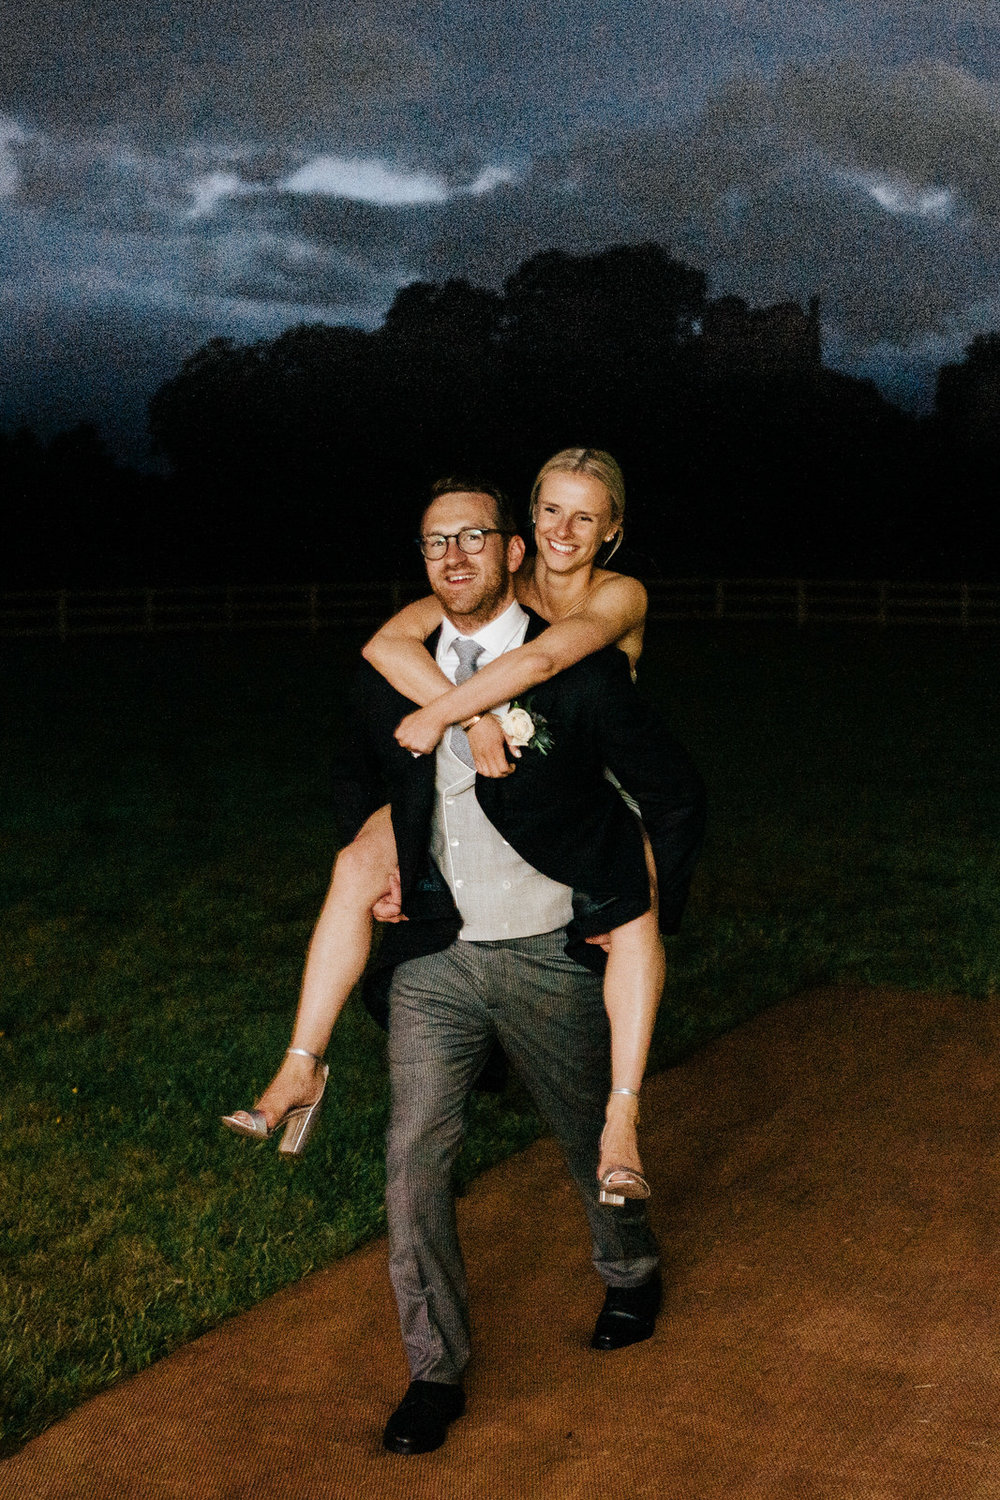  Bride rides "piggyback" style on groom as she re-enters marquee after wardrobe change 